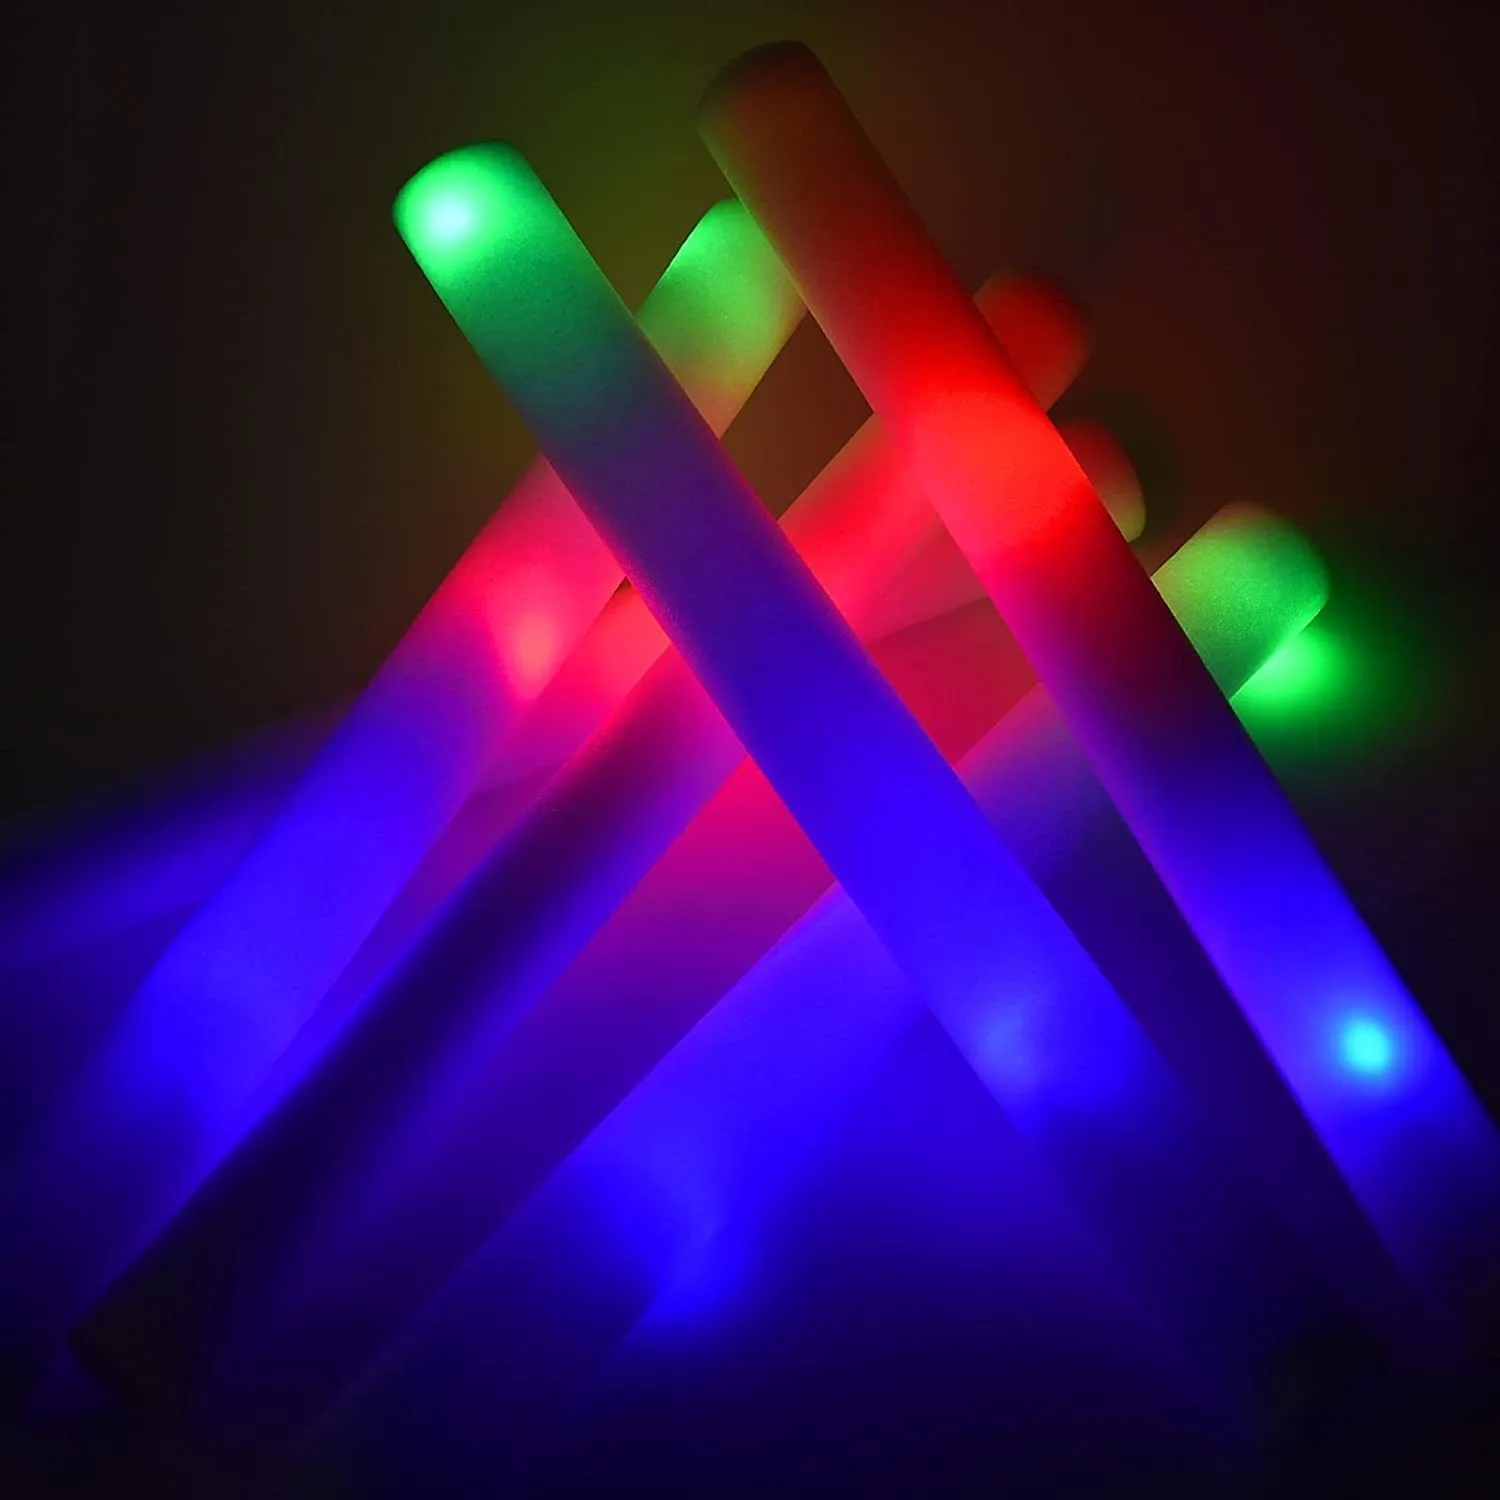 Other Event Party Supplies Foam Glow Sticks For Wedding LED Light Up Foam  Sticks Colorful Flashing Sticks Birthday Easter Party Supplies Glow In The  Dark 230821 From Yujia10, $10.16